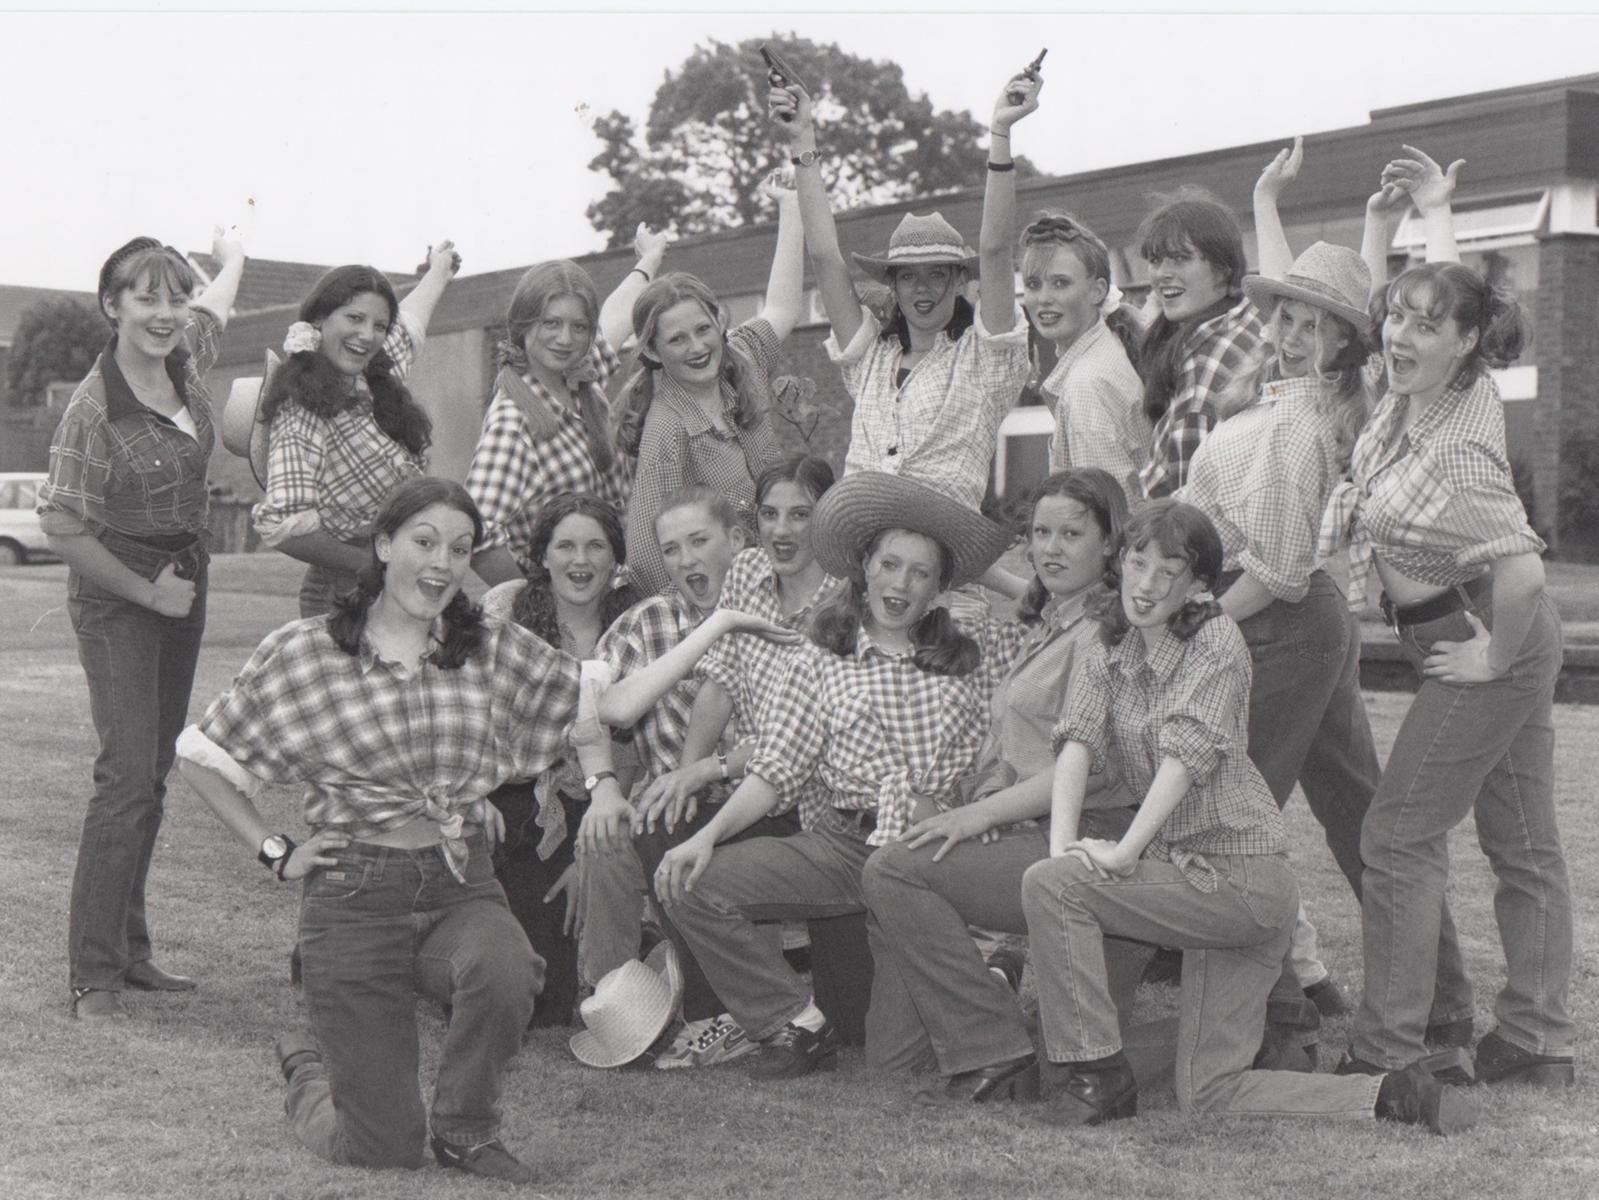 An annual tradition at St Augustine's School is an end of term theme day when everyone dresses up - the theme  in 1997 was the movies. Vickie Wyatt, front, as Calamity Jane, who leads the line up singing their version of The Deadwood Stage, called The Old Brid' Bus!